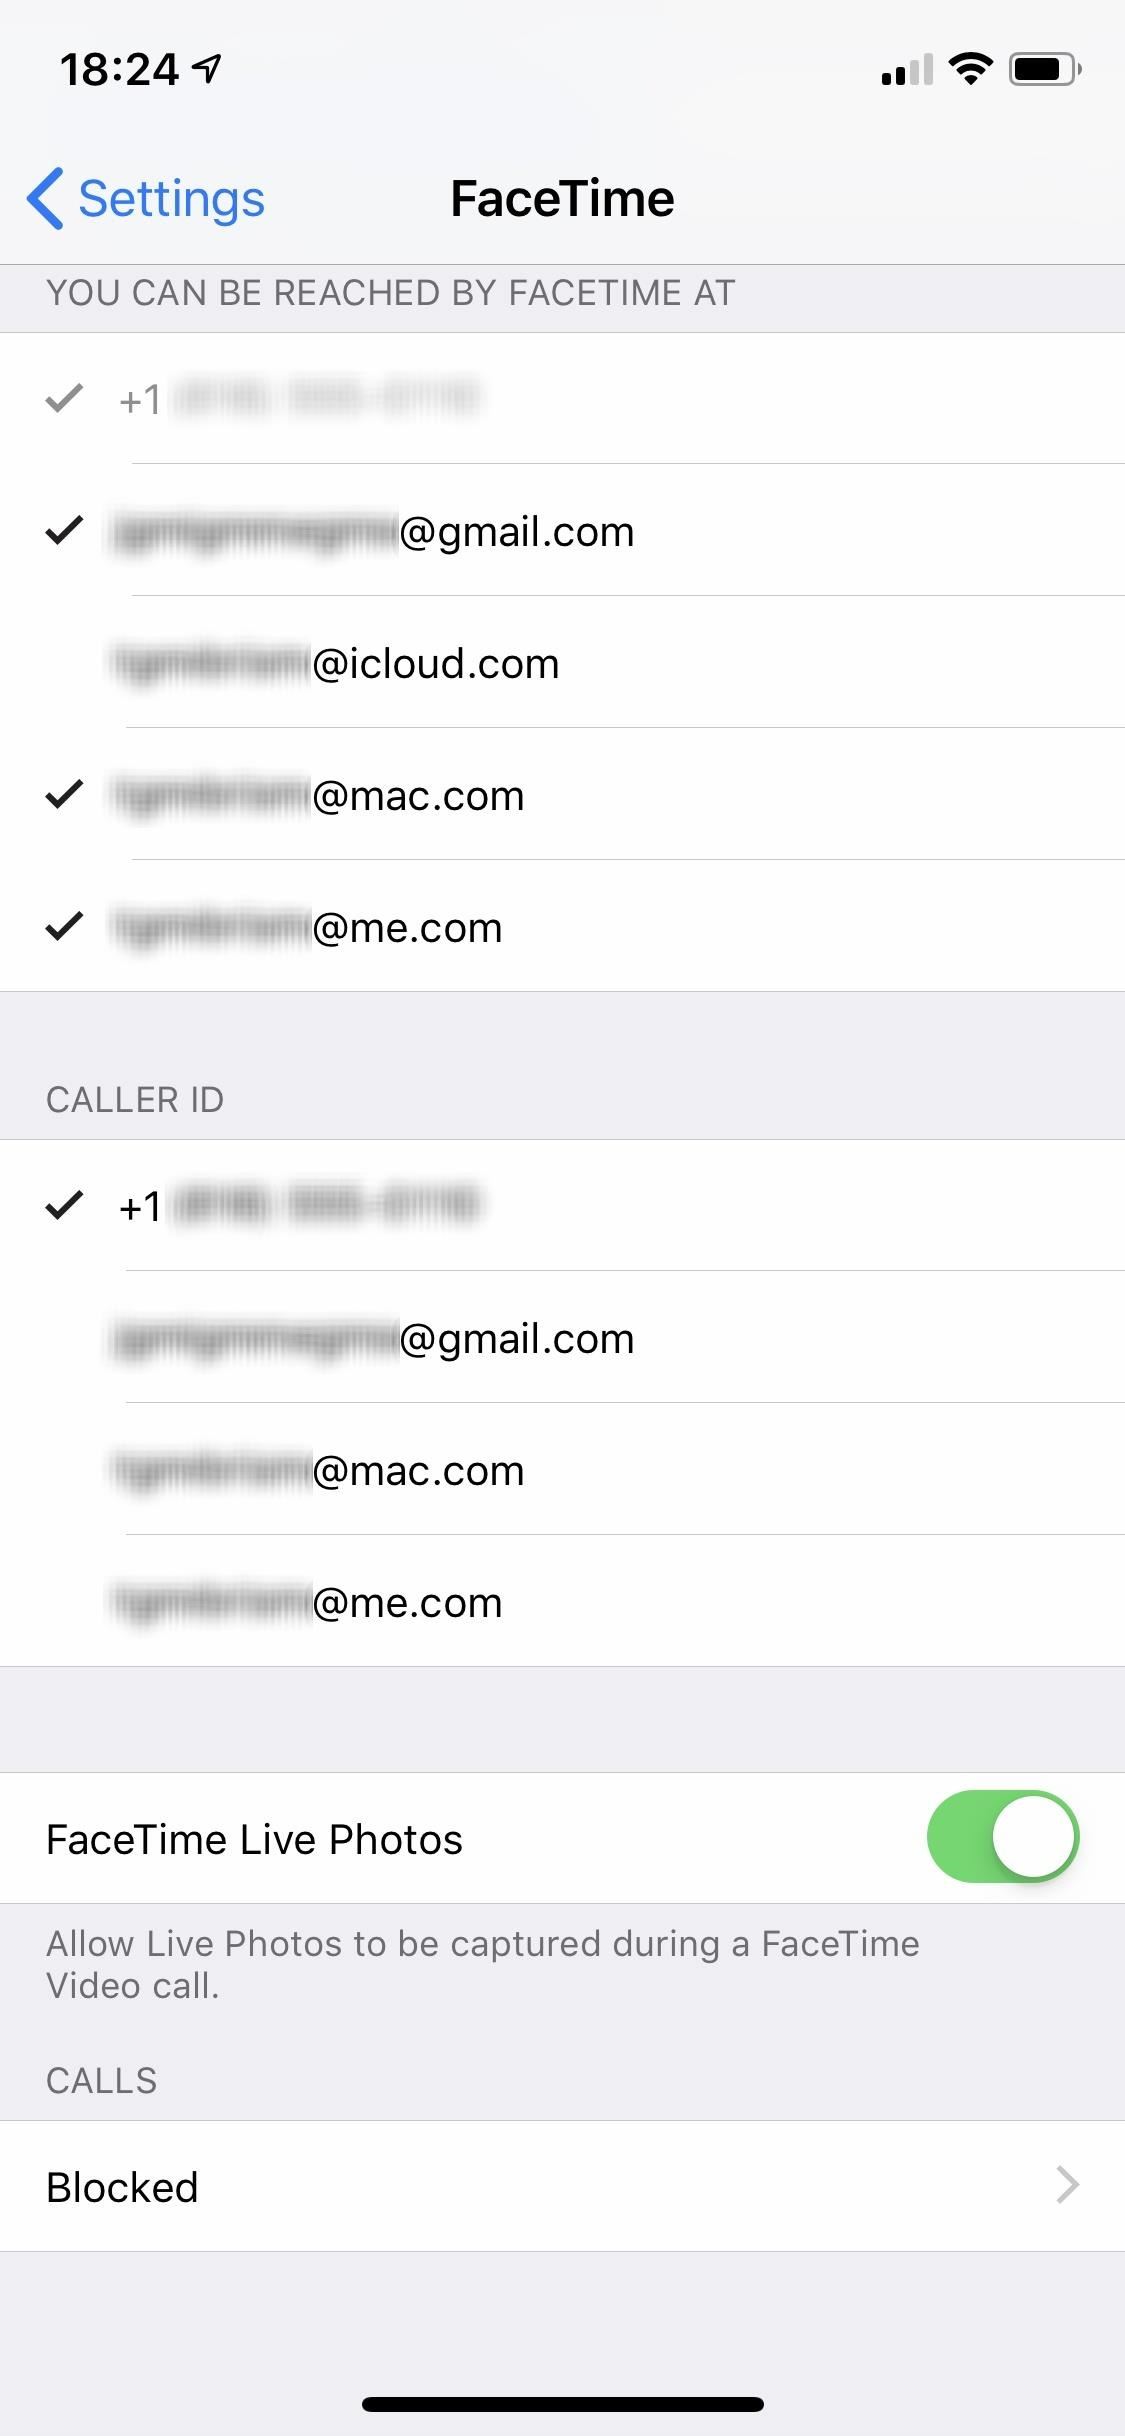 How to Change Your FaceTime Caller ID to an Email Address or Phone Number